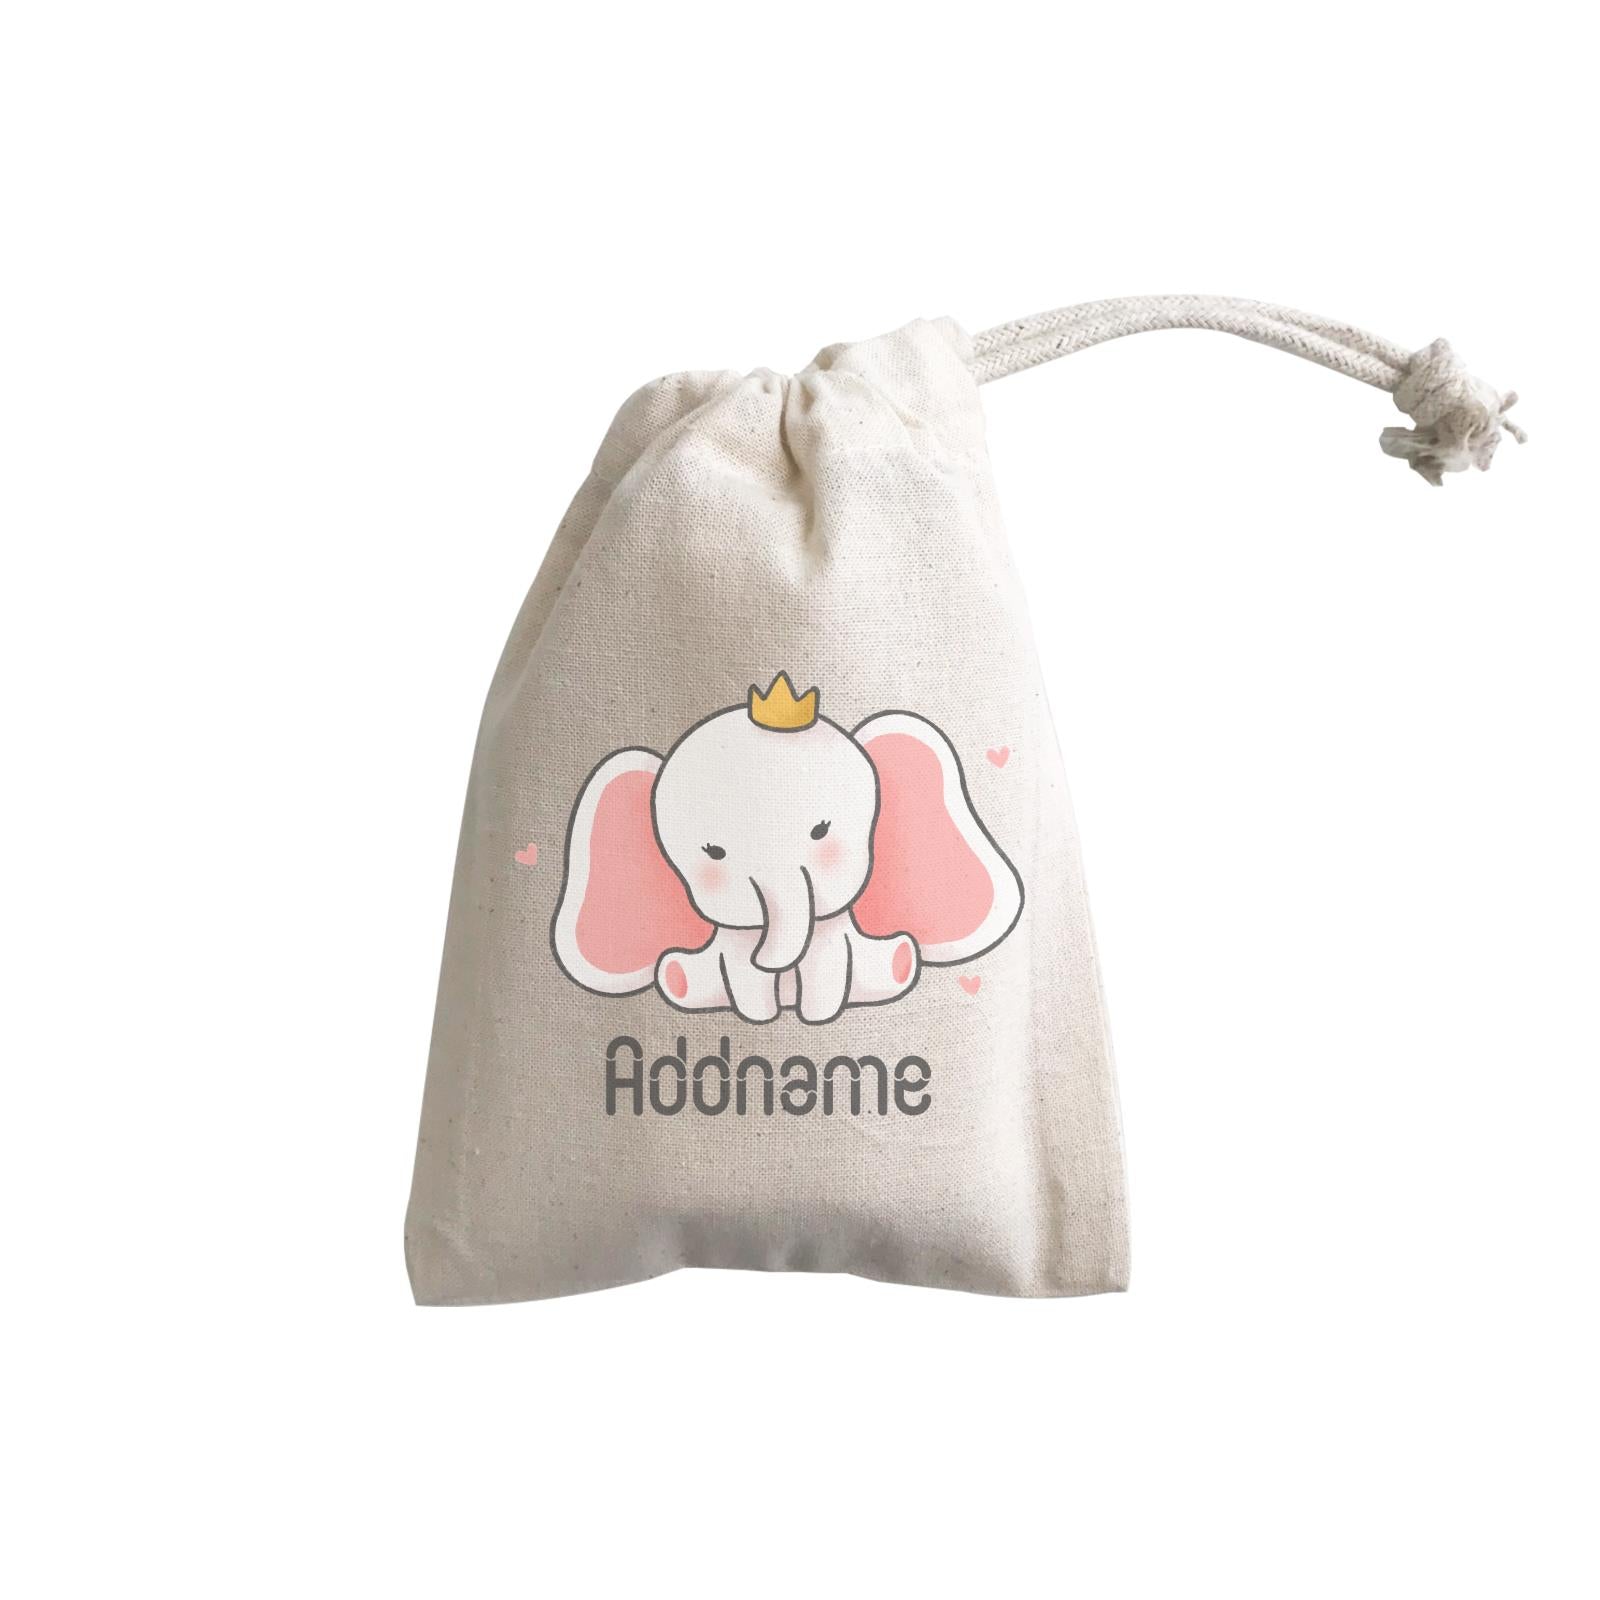 Cute Hand Drawn Style Baby Elephant with Crown Addname GP Gift Pouch